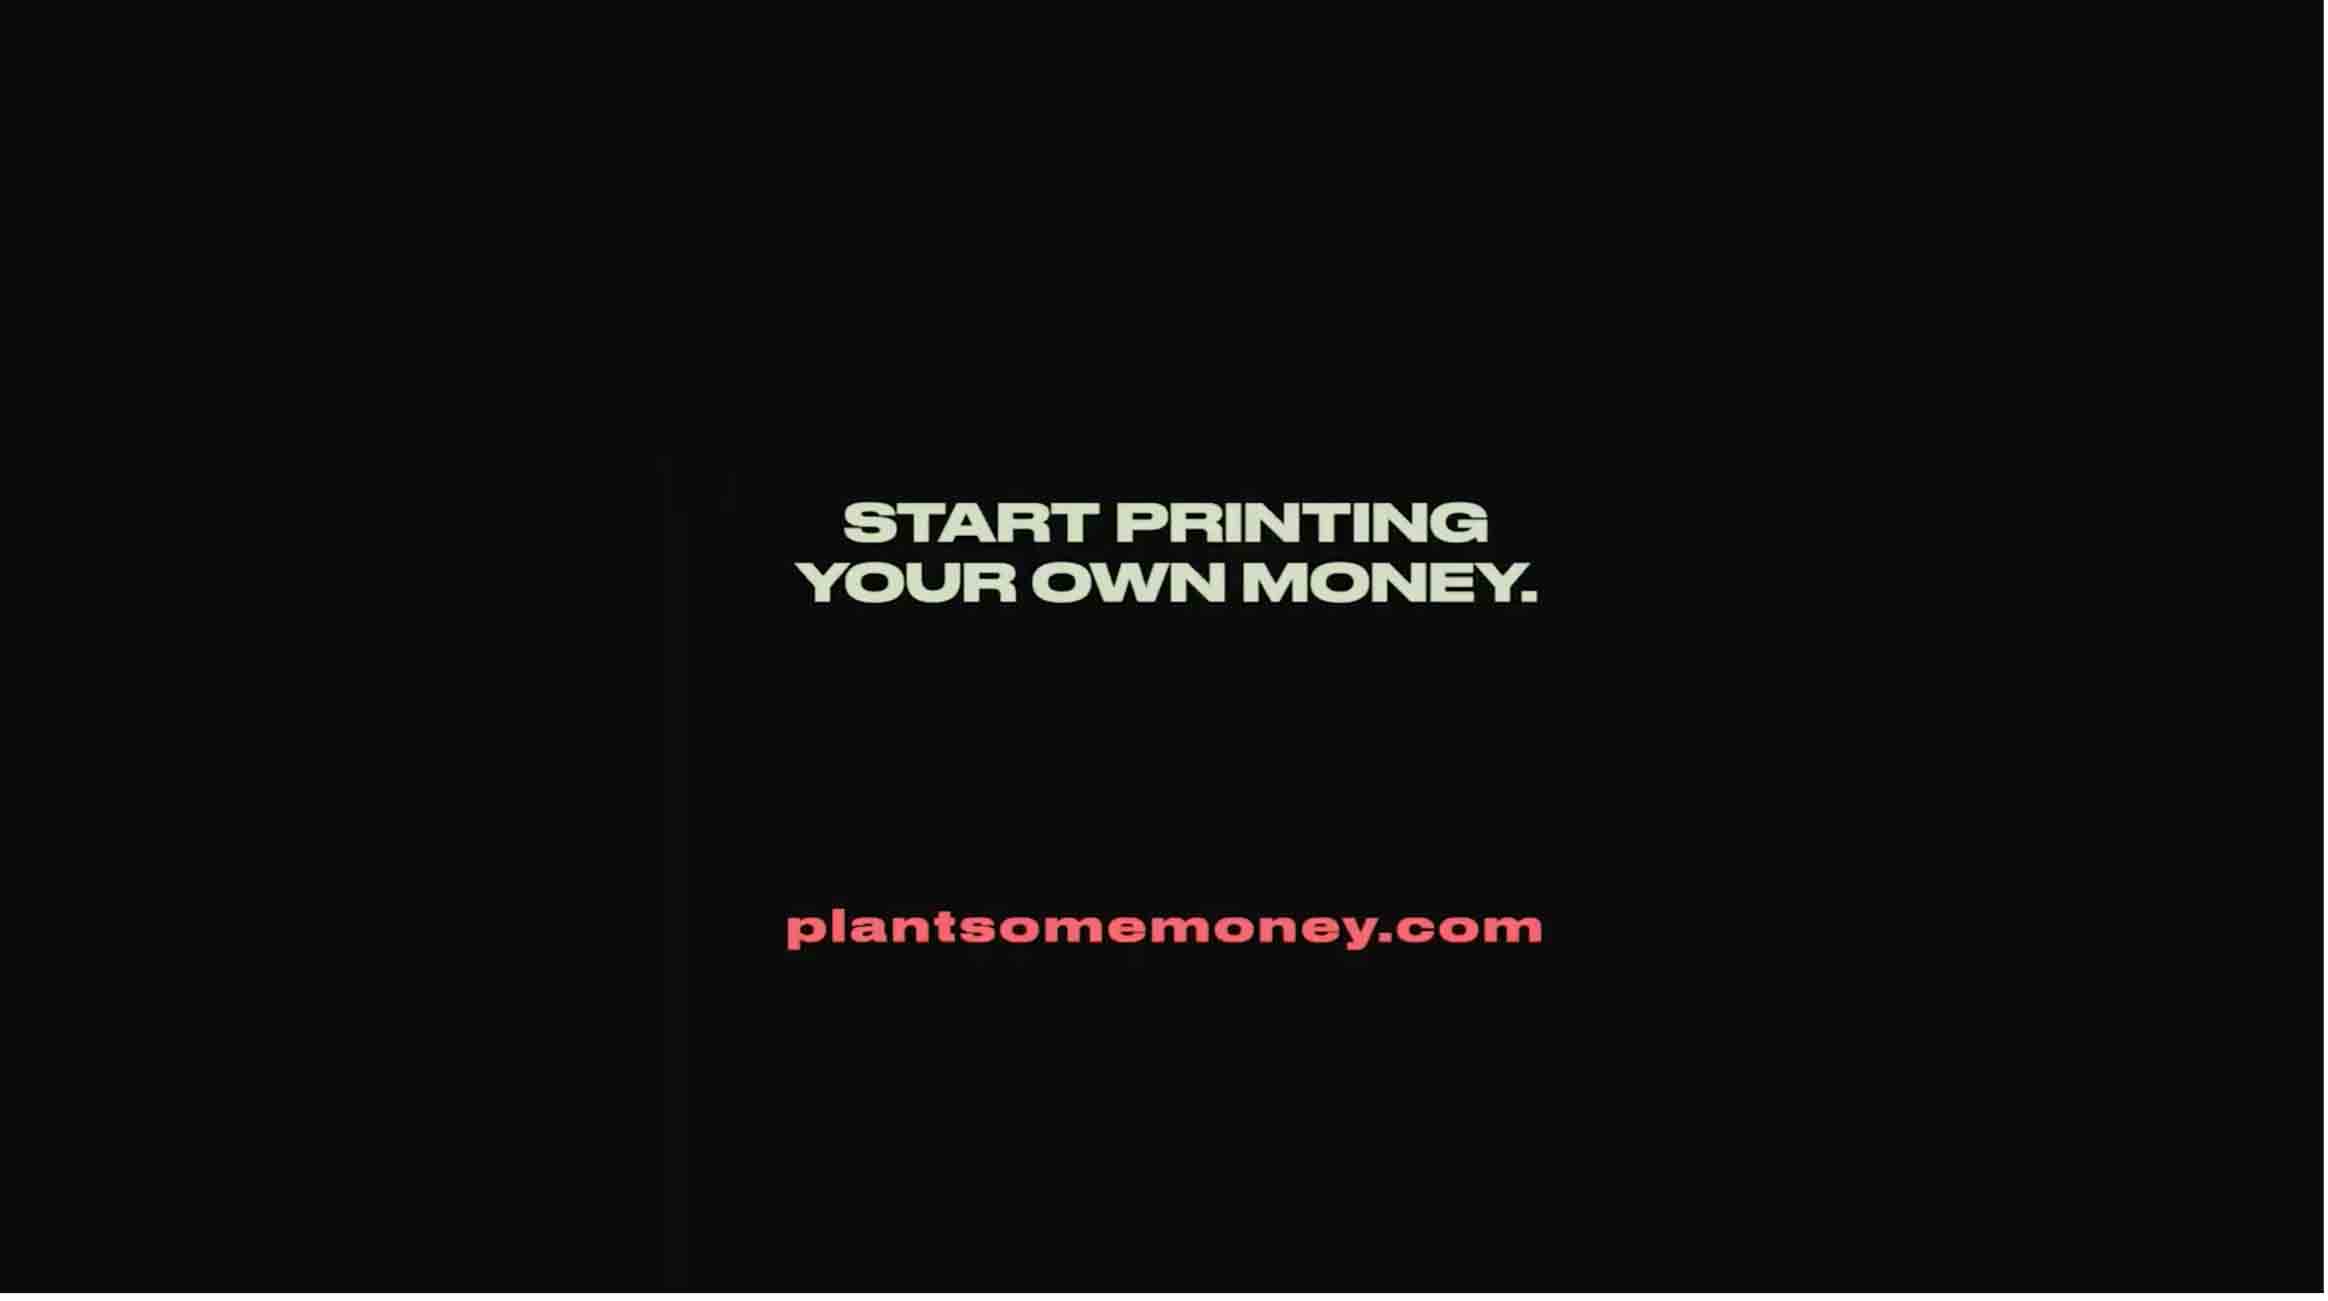 PSA video production company in Los Angeles - print your own money